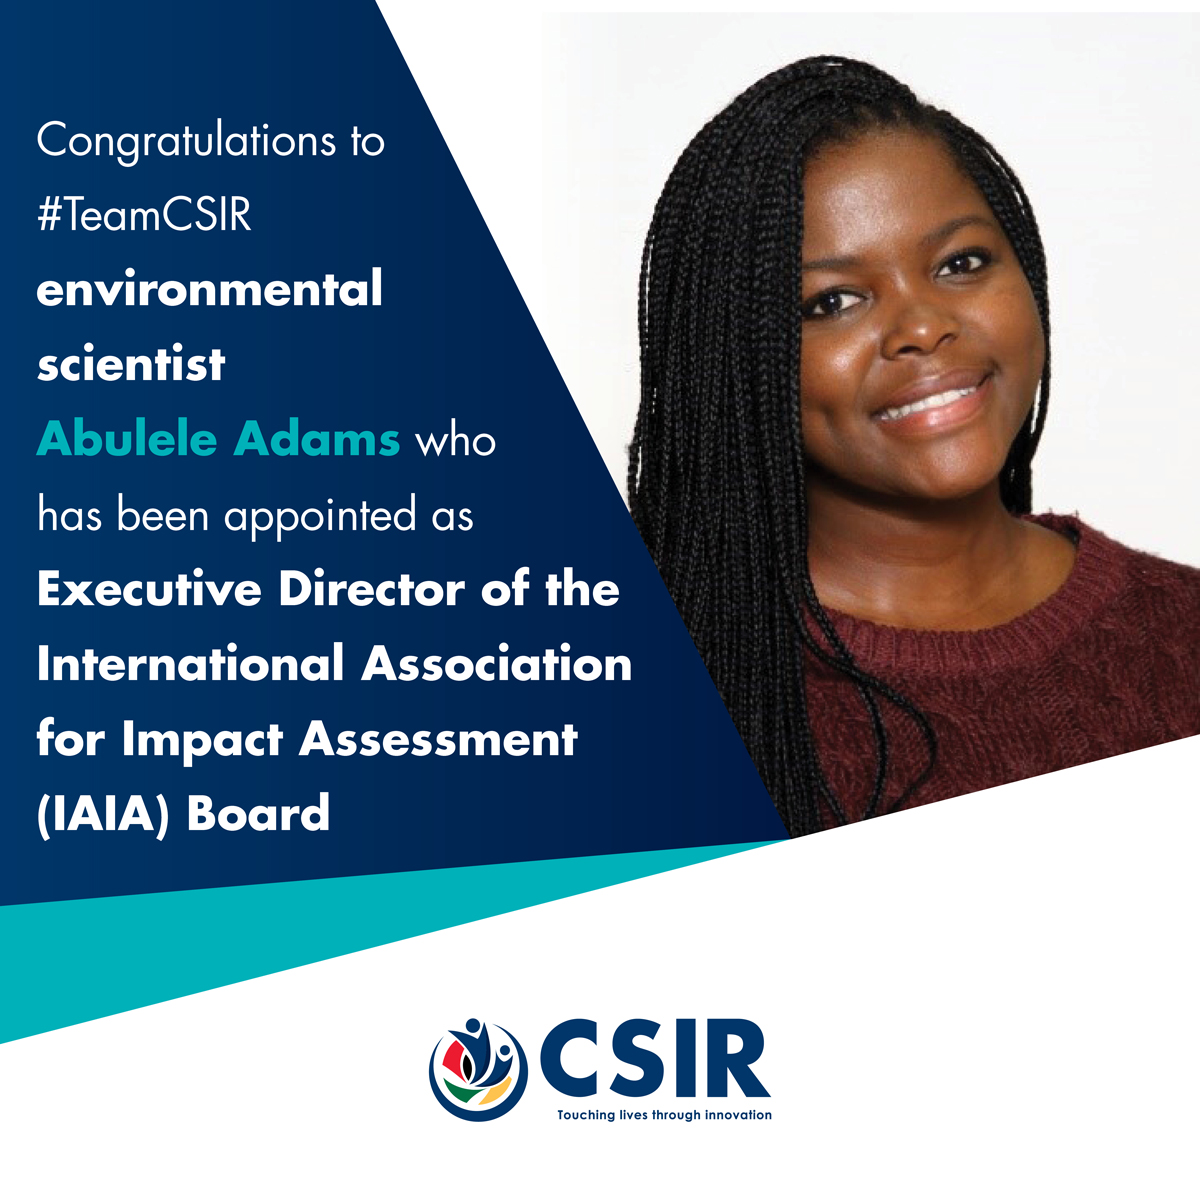 Join us as we congratulate #TeamCSIR environmental scientist Abulele Adams who has been appointed as Executive Director of the International Association for Impact Assessment (IAIA) Board. Great job Abulele! We are so proud of you! csir.co.za/abulele-adams-…